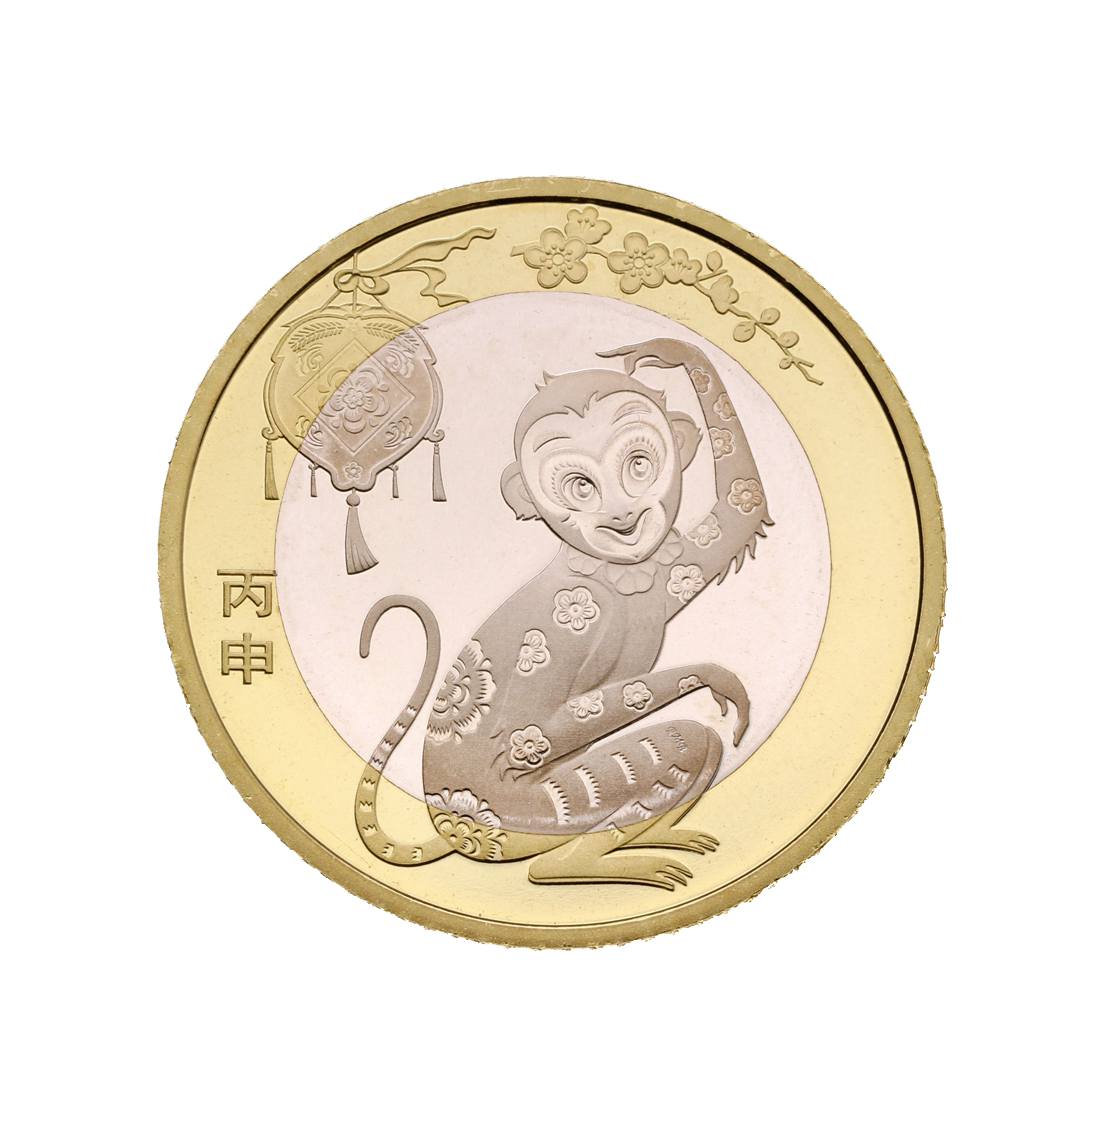 2016 Lunar New Year Year of the Monkey commemorative coins